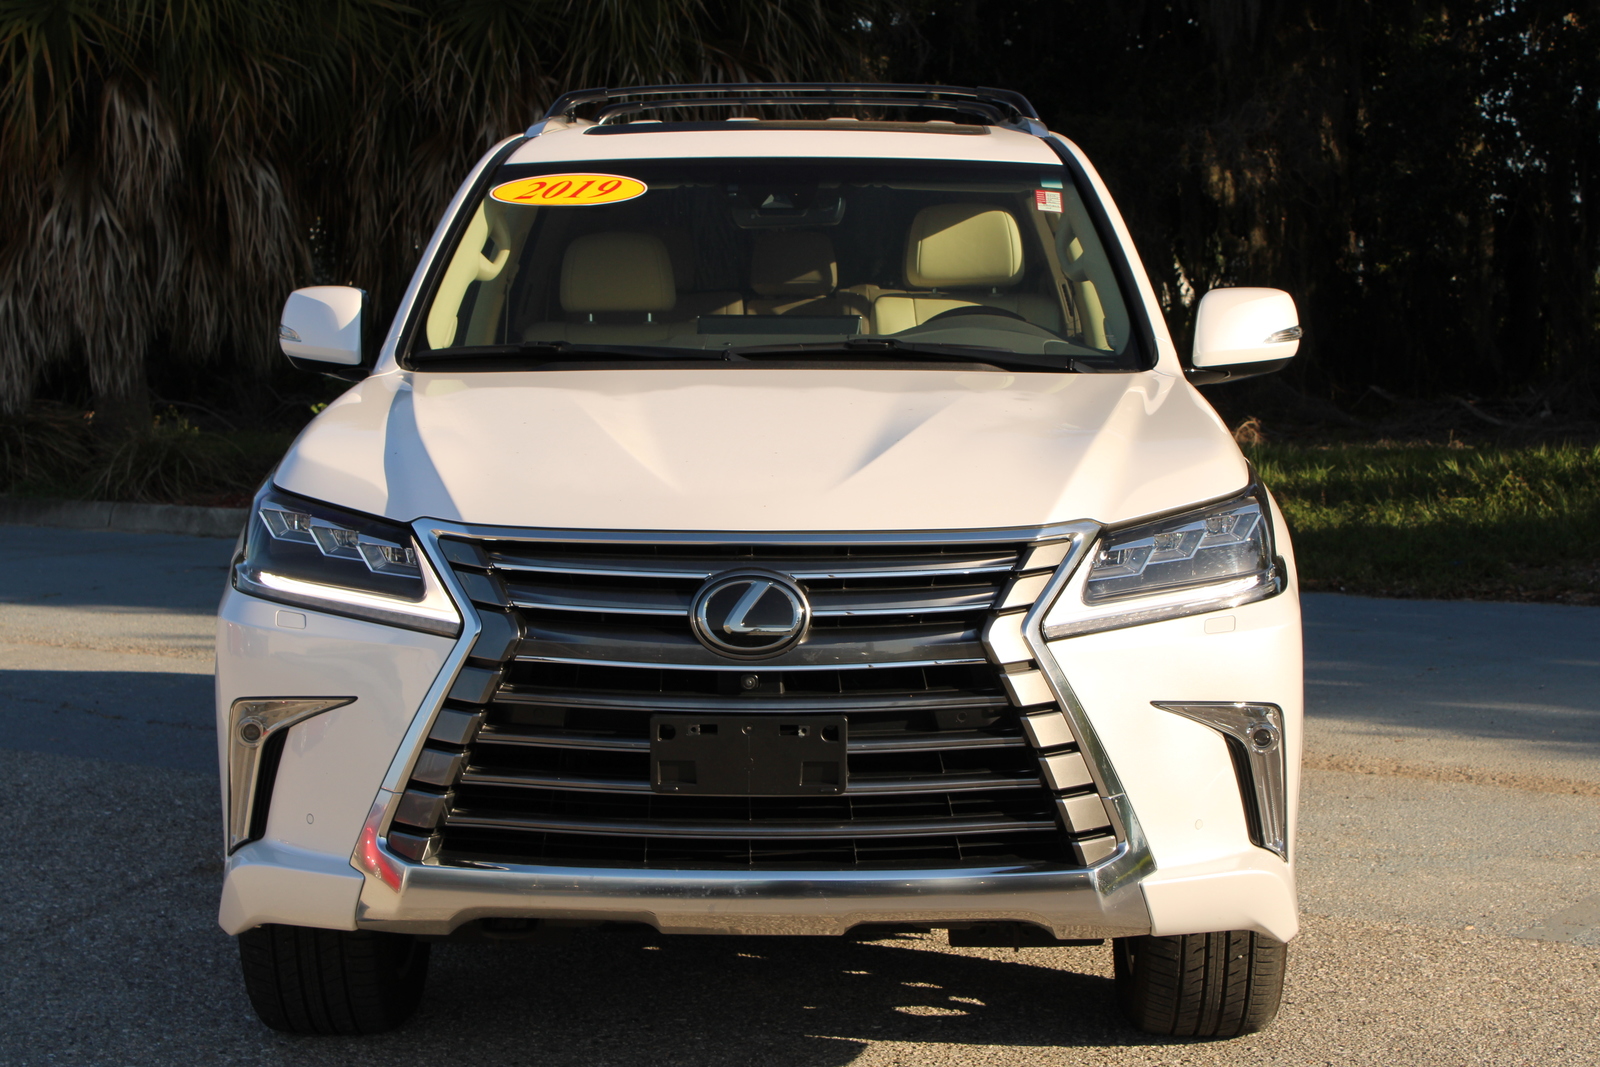 PreOwned 2019 Lexus LX 570 LX 570 Sport Utility in